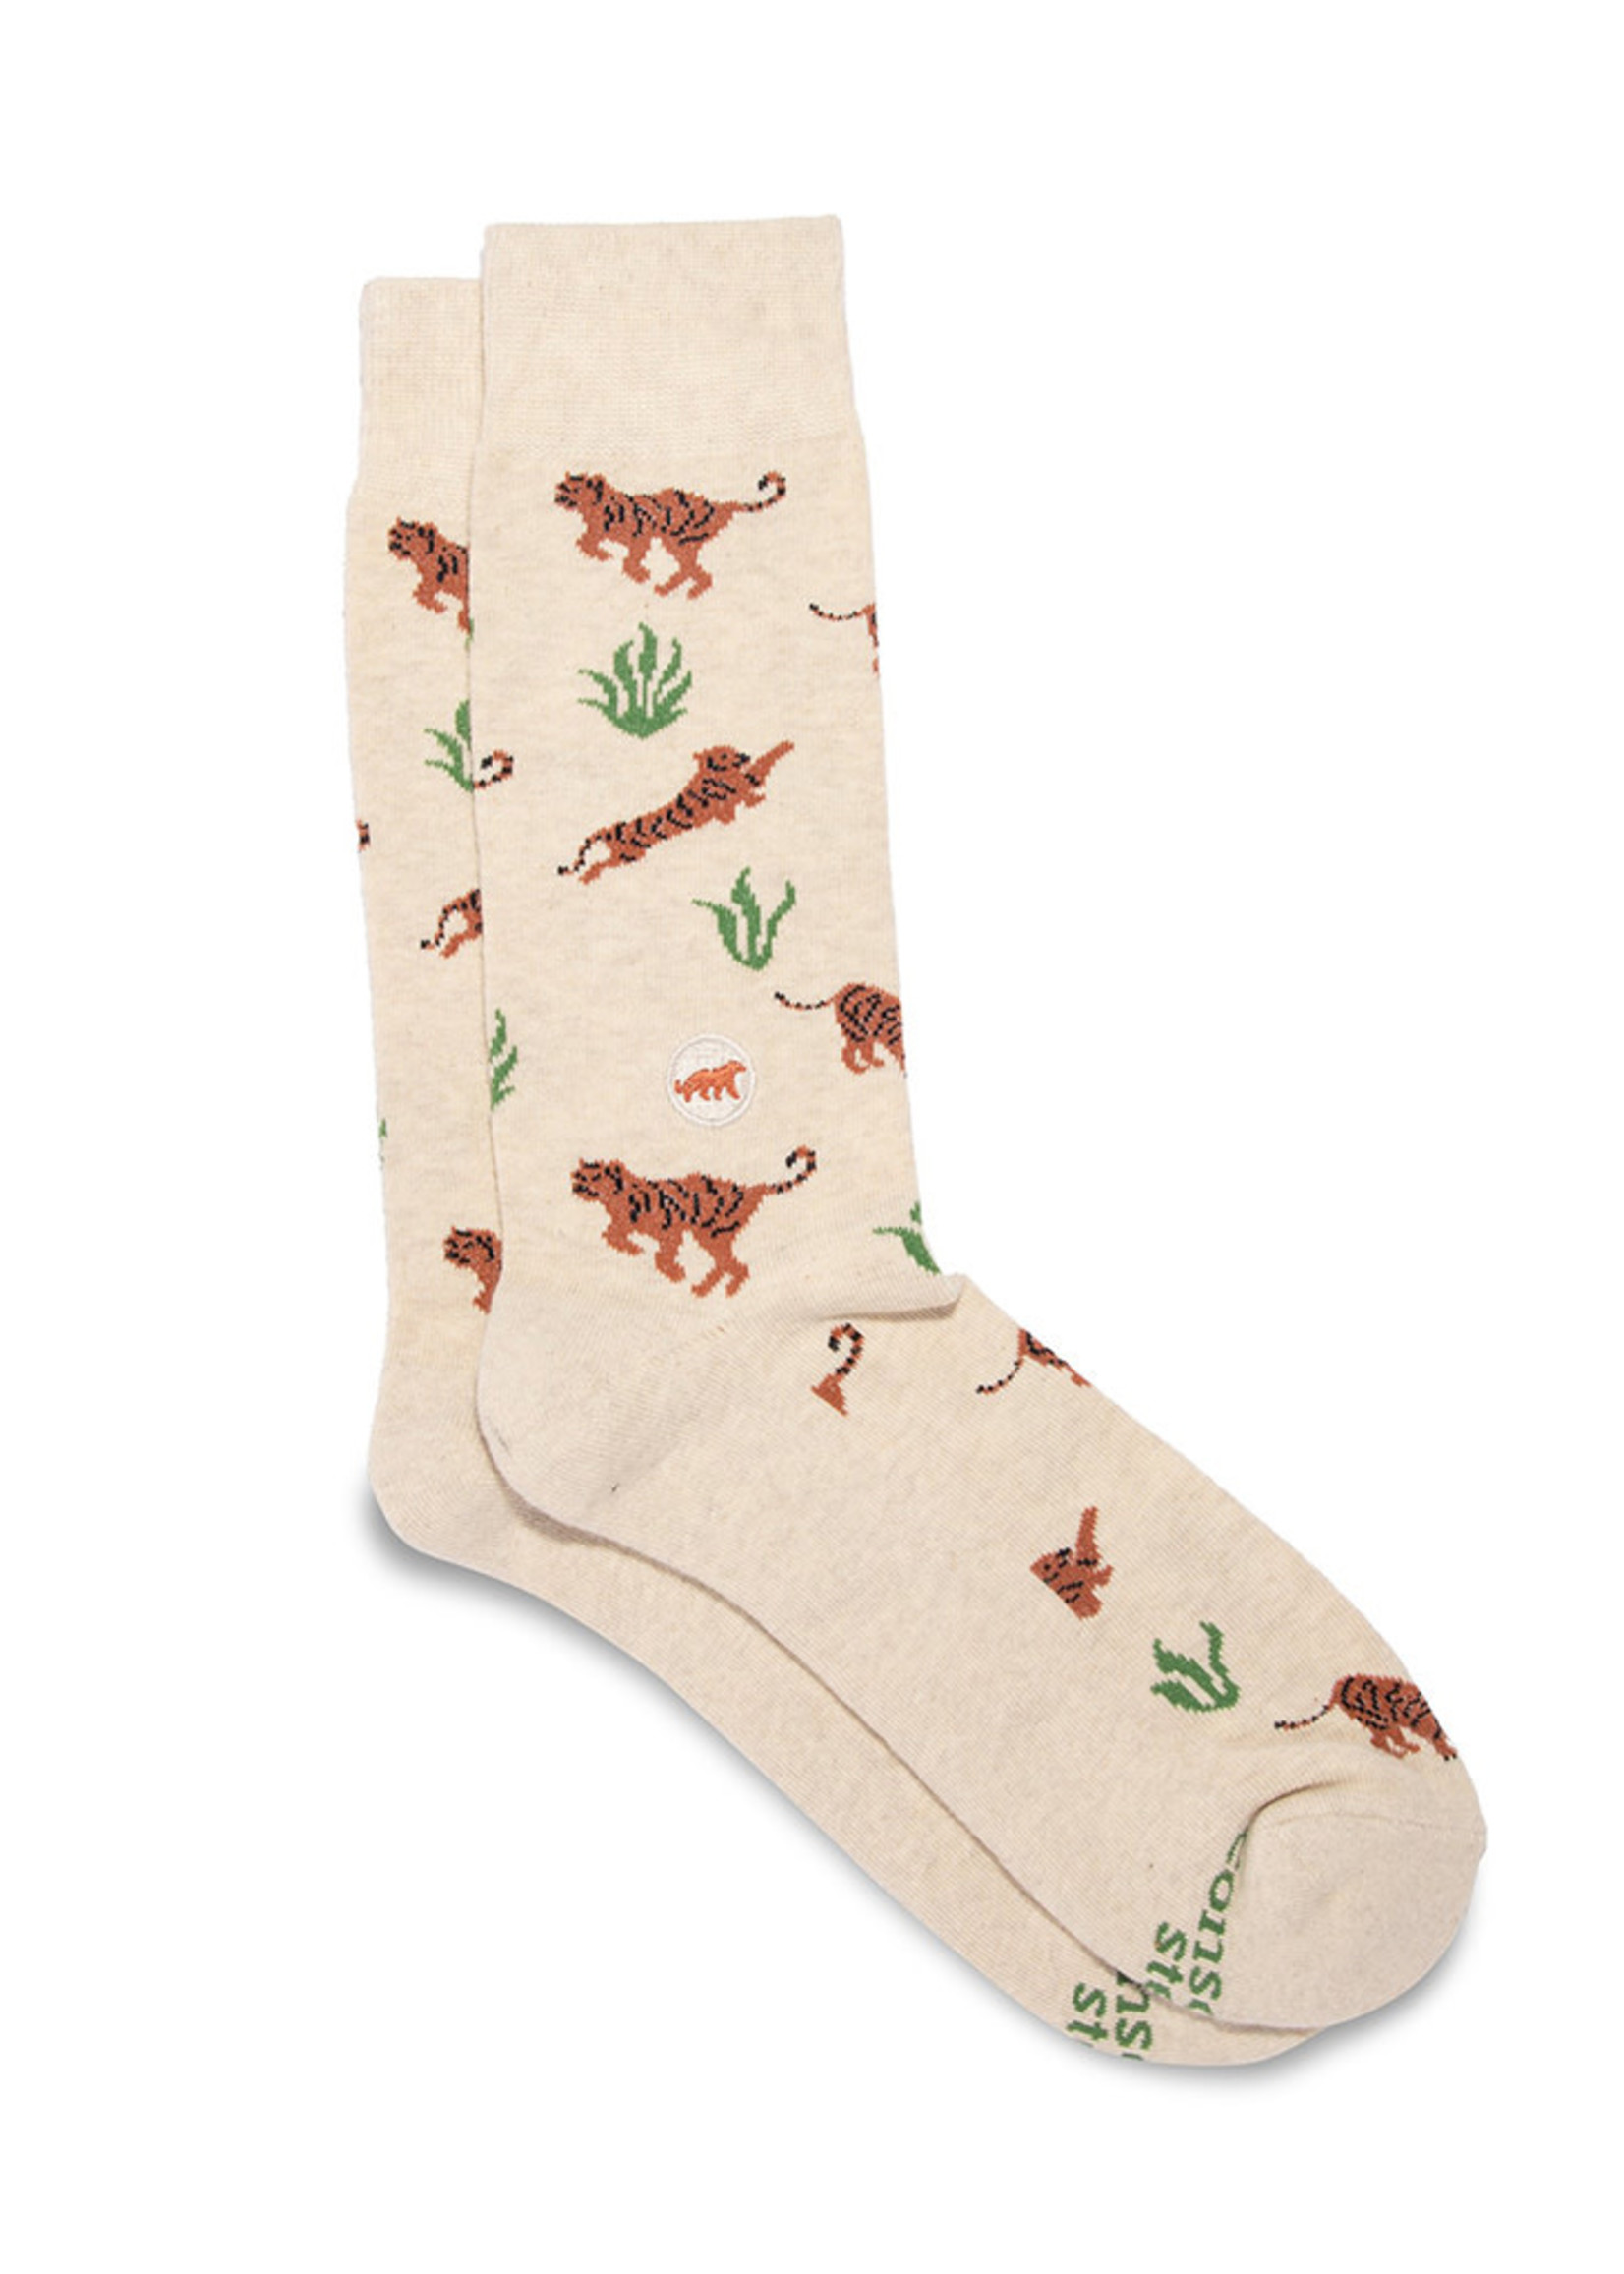 Conscious Step Women's Socks that Protect Tigers